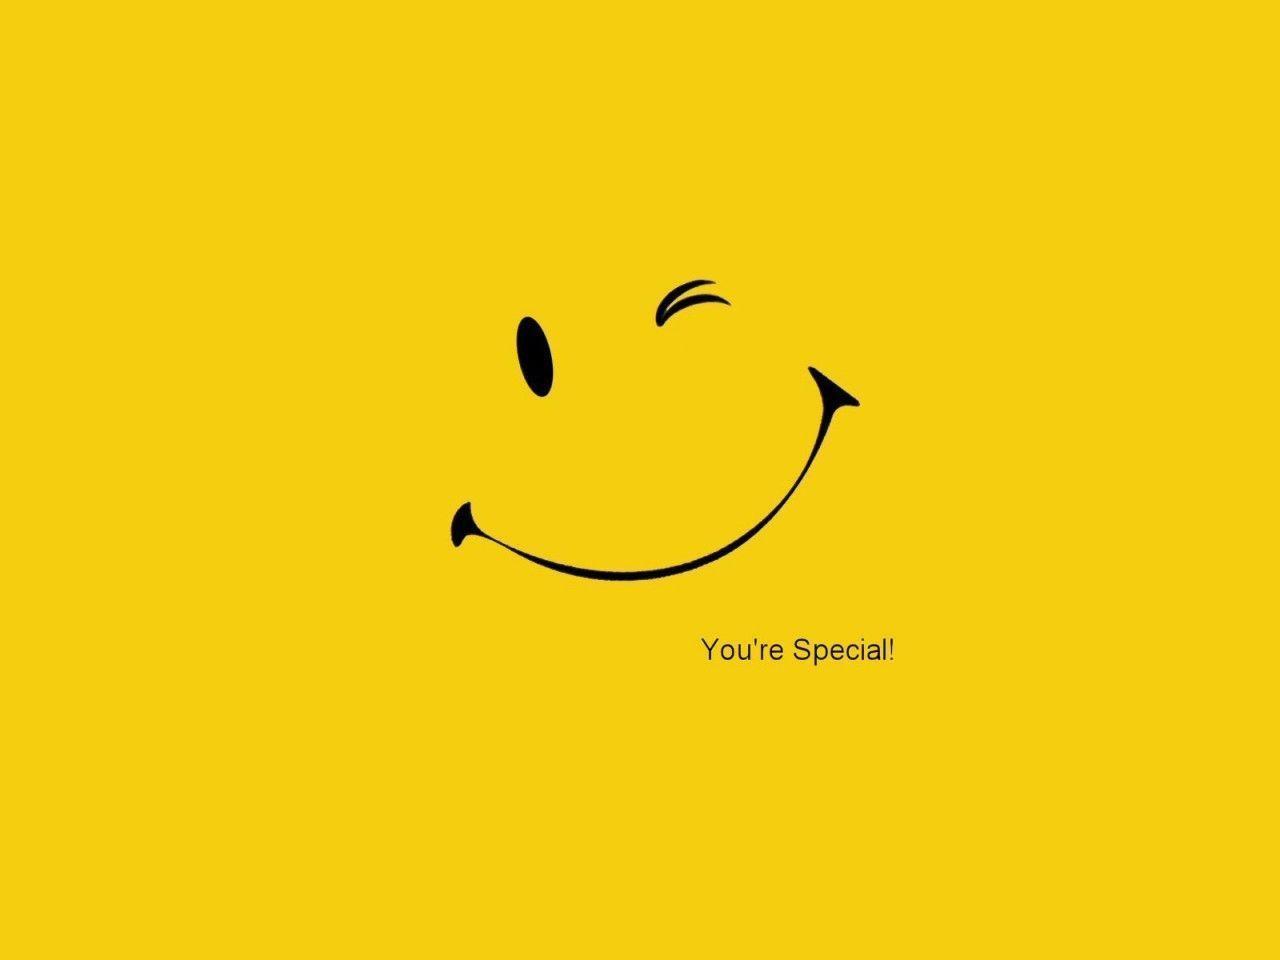 Simple Smiley Face Wallpaper Android Wallpaper. Wallpaper